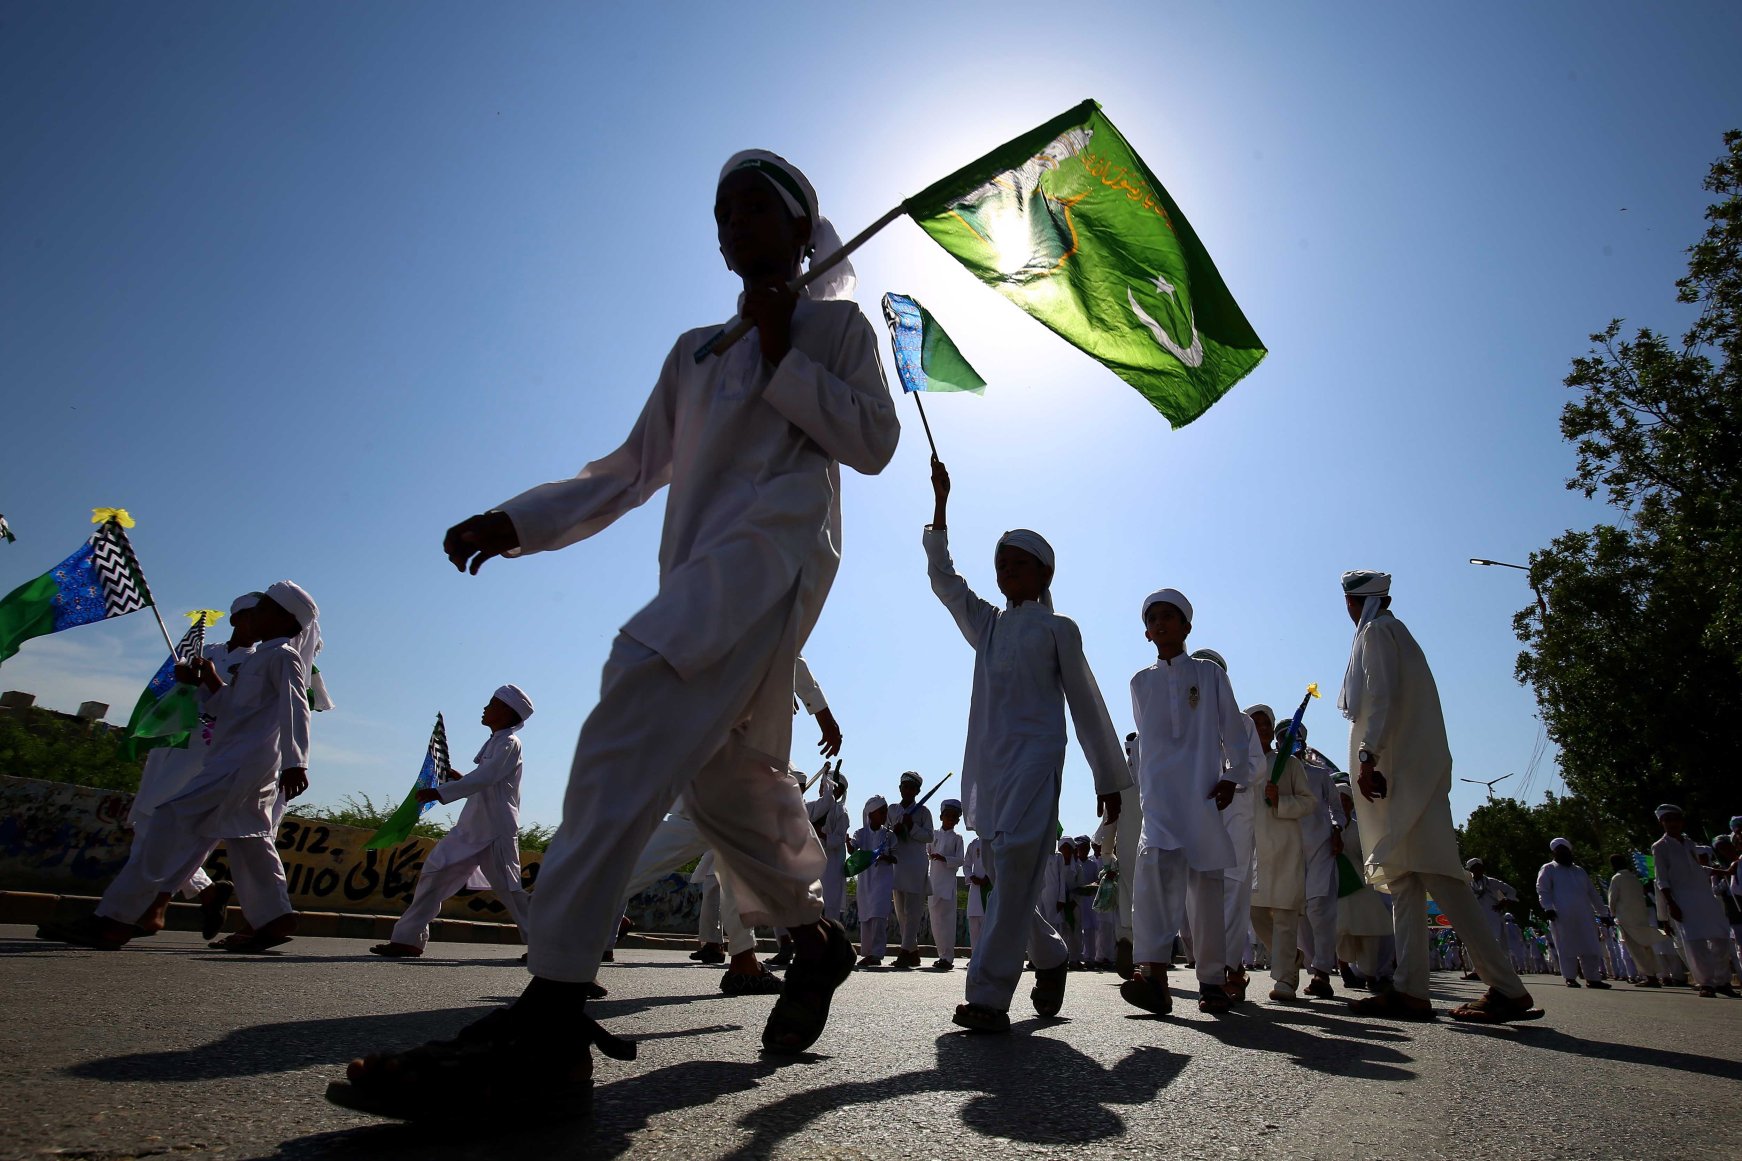 In Pictures: Muslims Celebrate Prophet Muhammad’s Birthday - About Islam